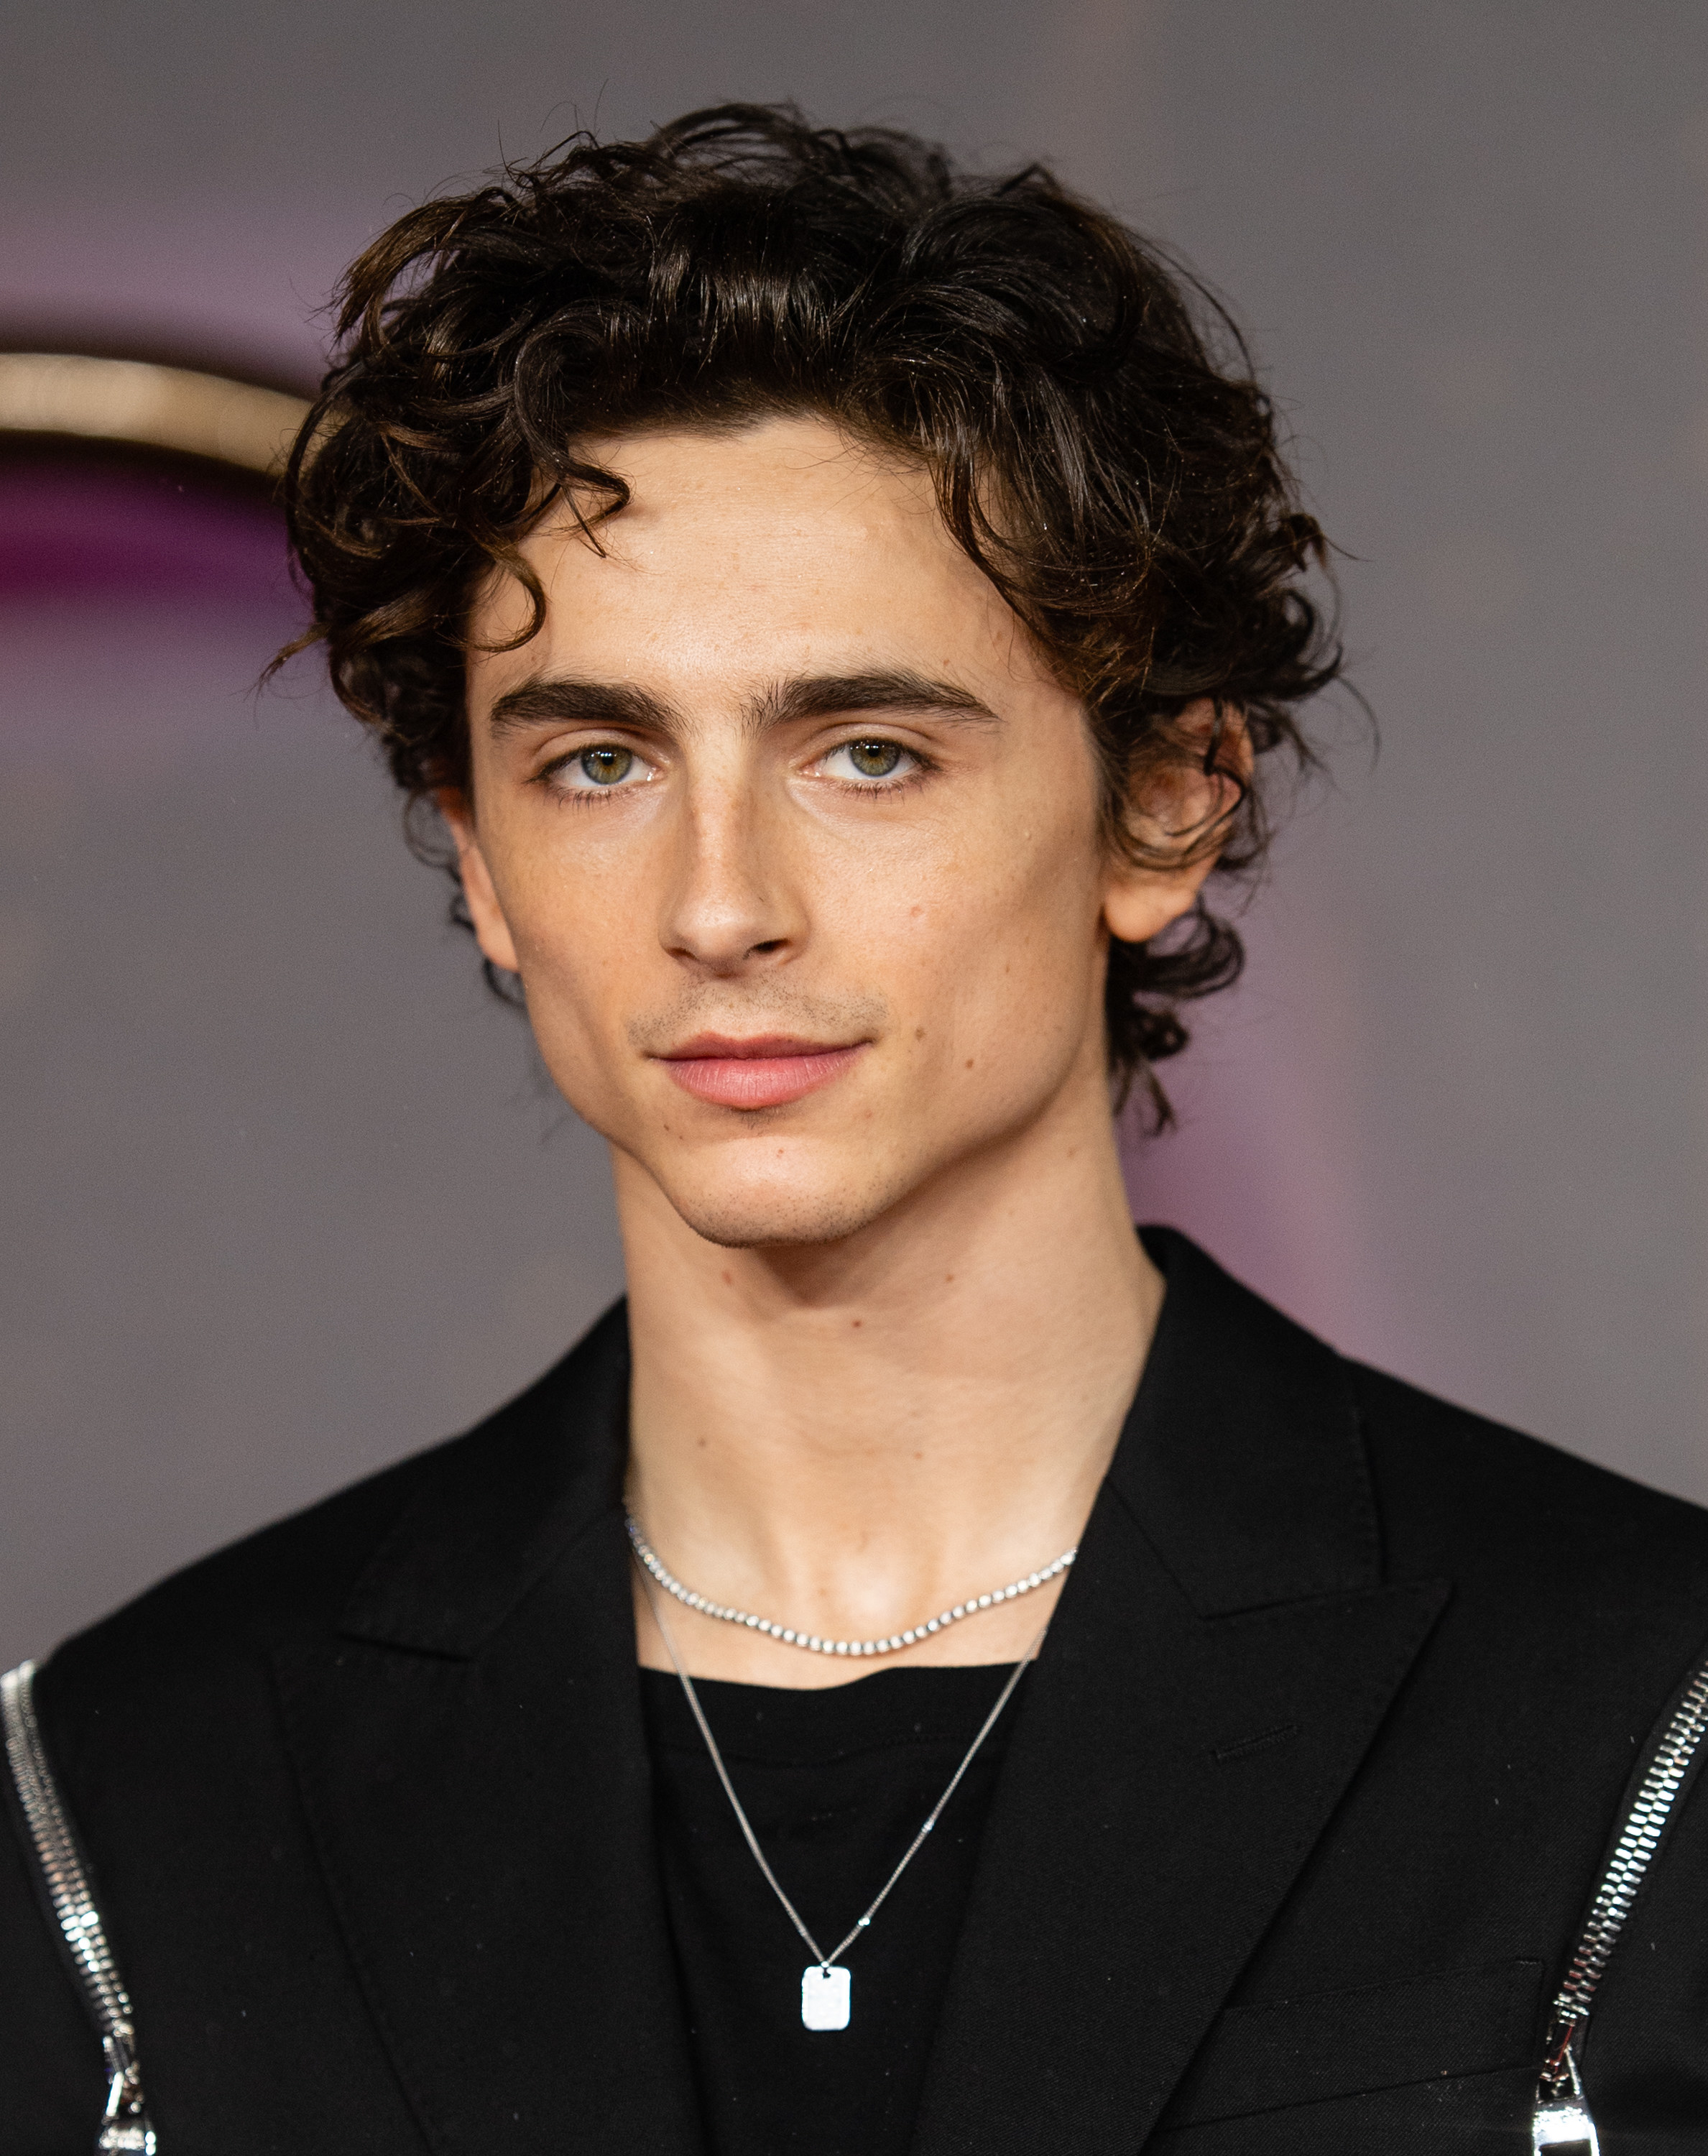 Timothée Chalamet Is Promoting 'Wonka' by Dating Kylie Jenner